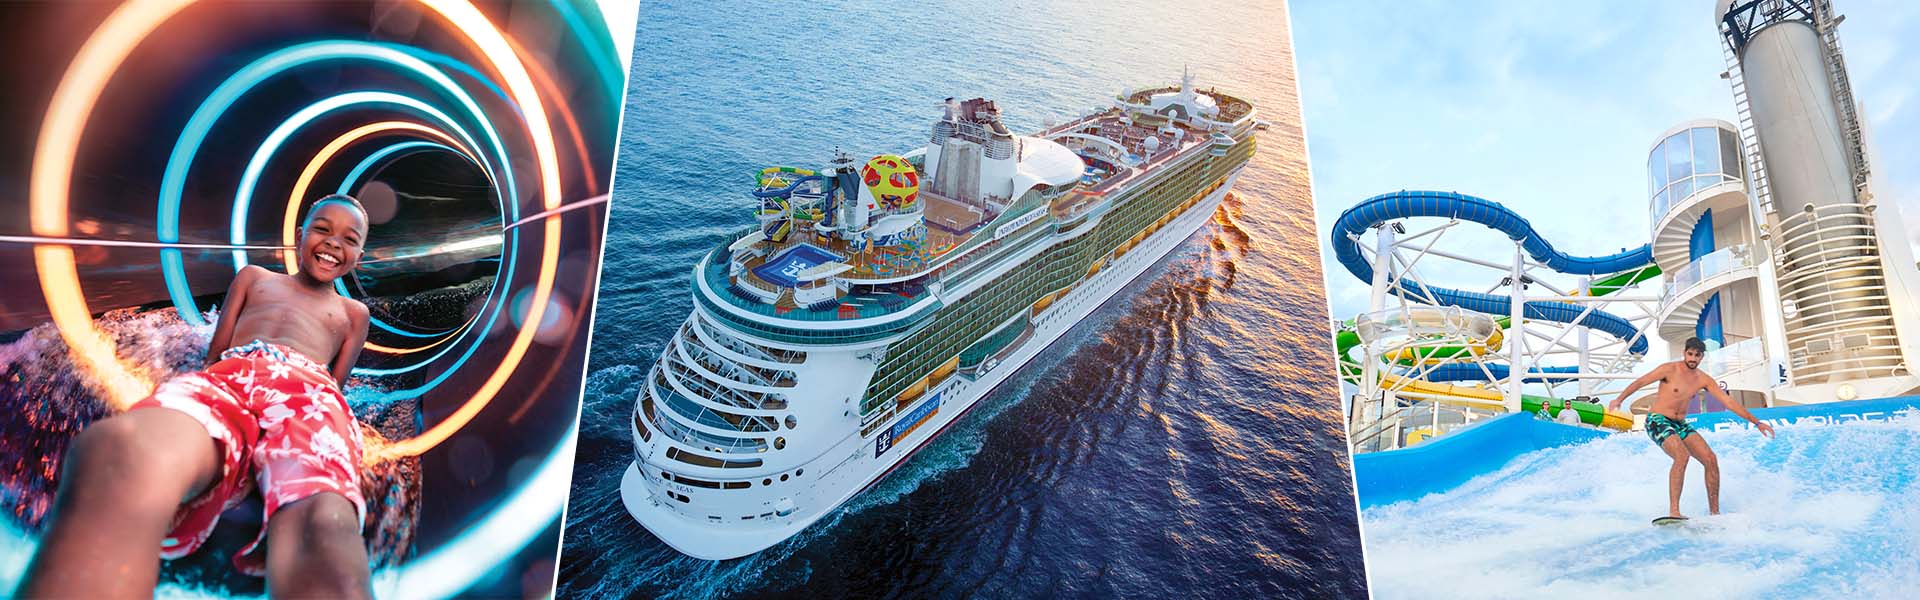 Independence of the Seas 2025 Cruises From Southampton